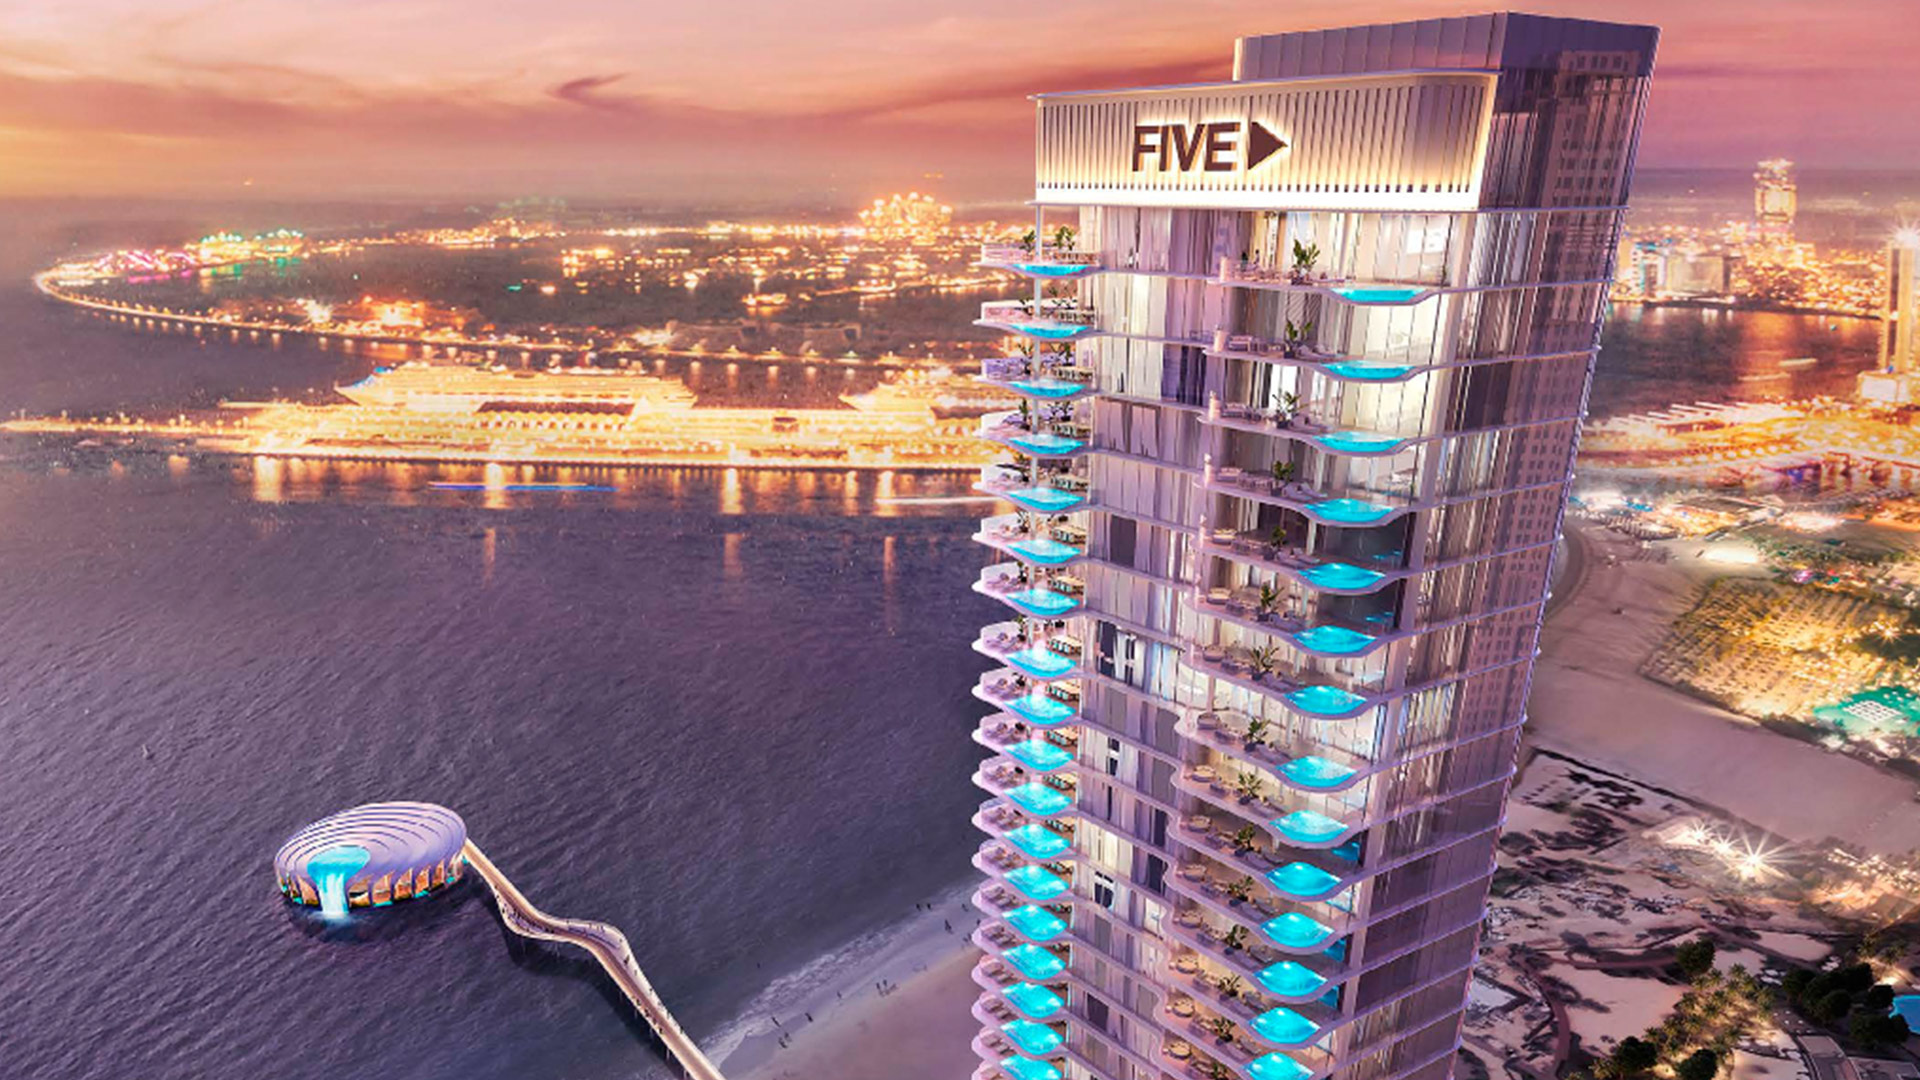 LIVE EXTRAORDINARILY AT THE FIVE JBR